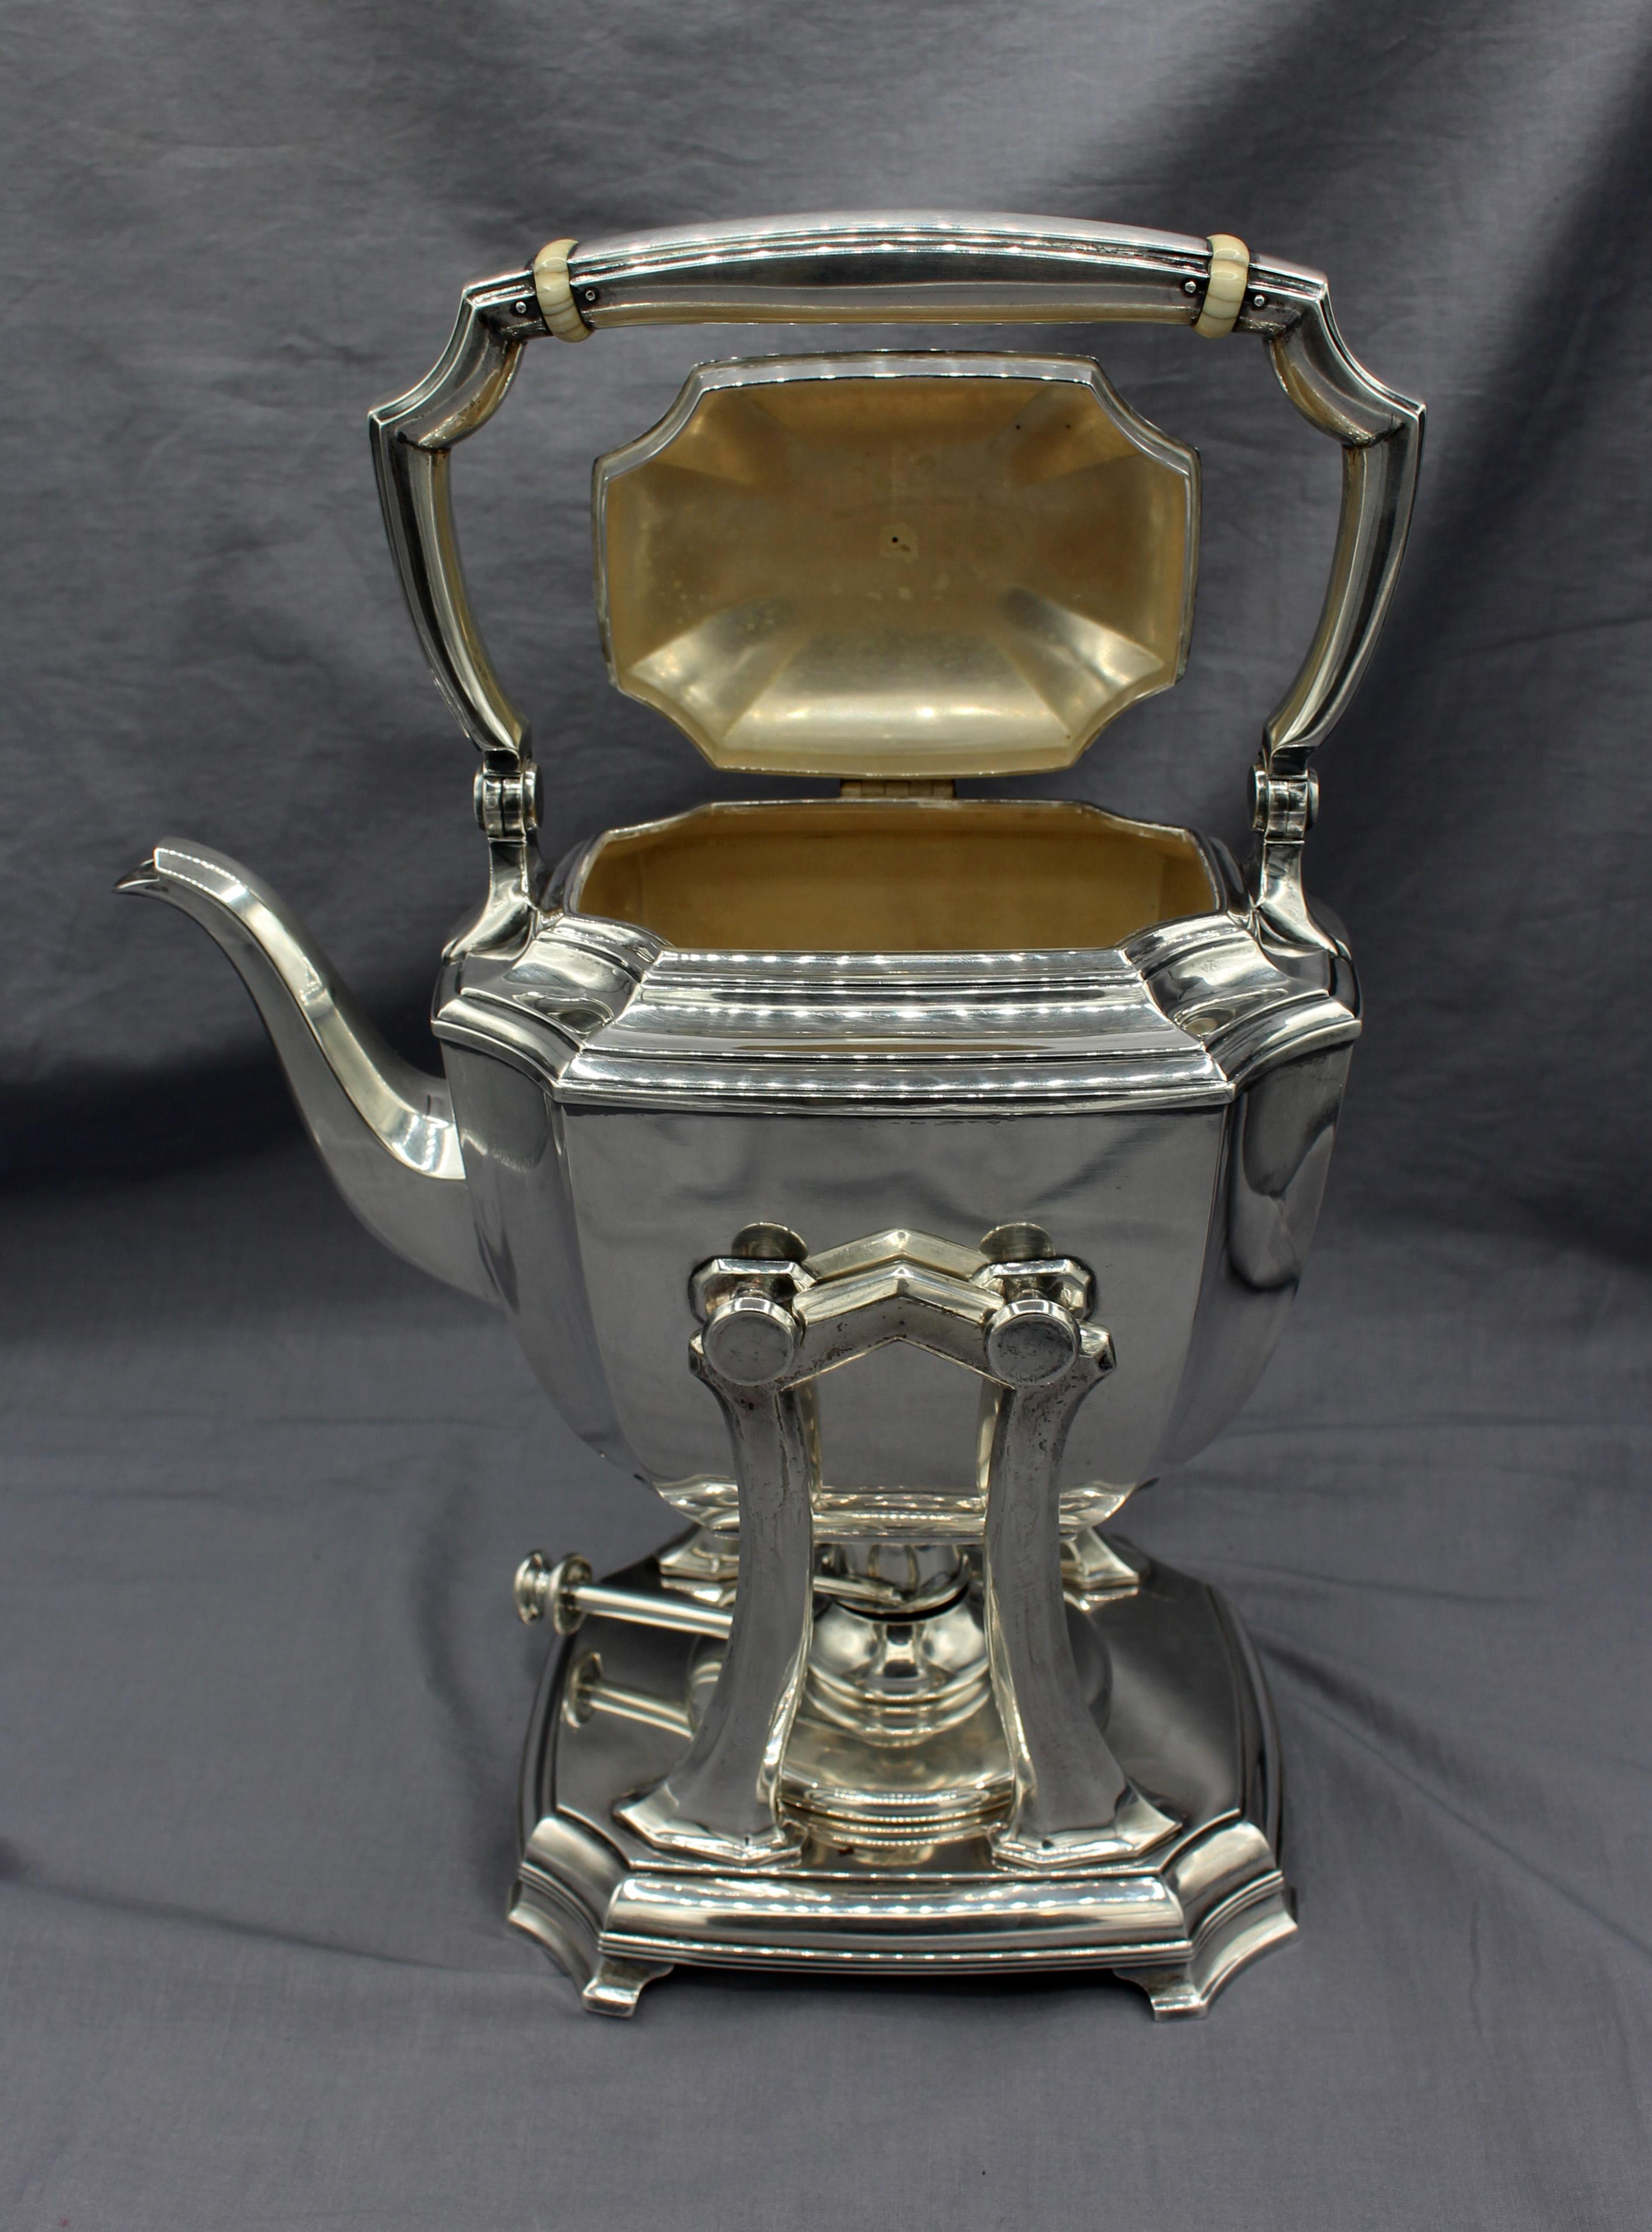 c. 1920s-30s 4-Piece Sterling Silver Tea Service by Tiffany In Good Condition For Sale In Chapel Hill, NC